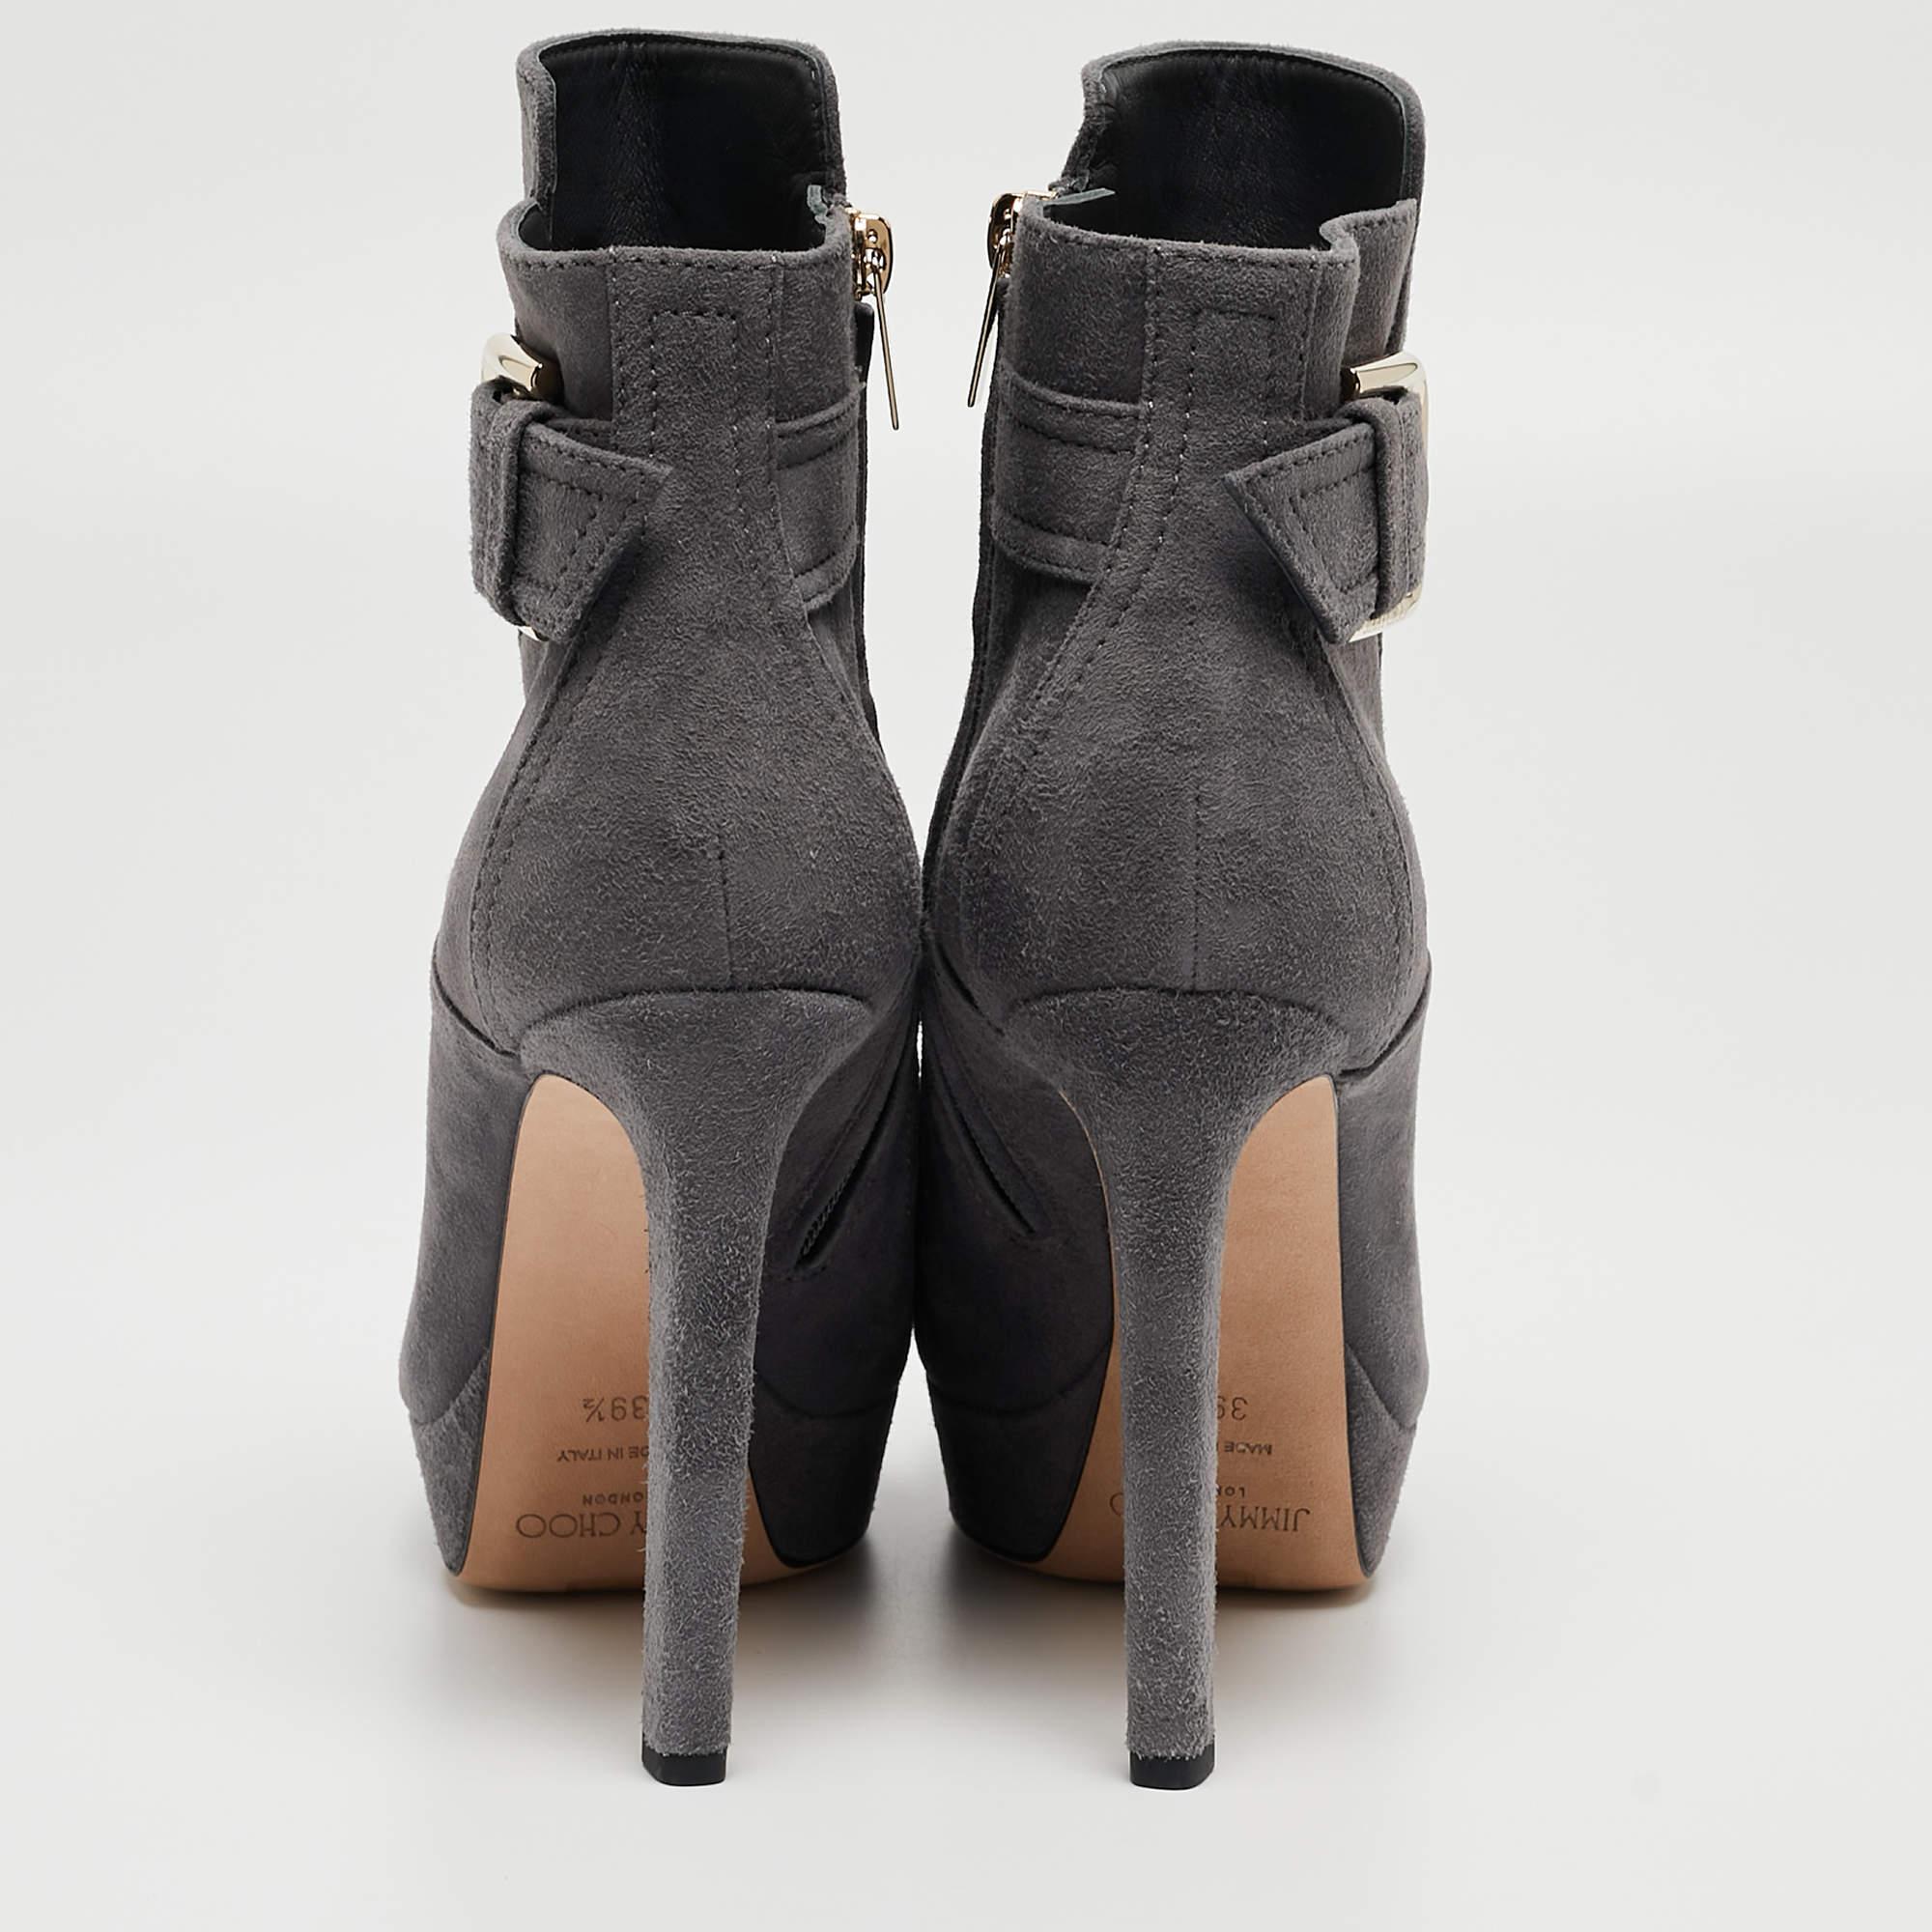 Jimmy Choo Grey Suede Britney Ankle Boots Size 39.5 In Excellent Condition For Sale In Dubai, Al Qouz 2